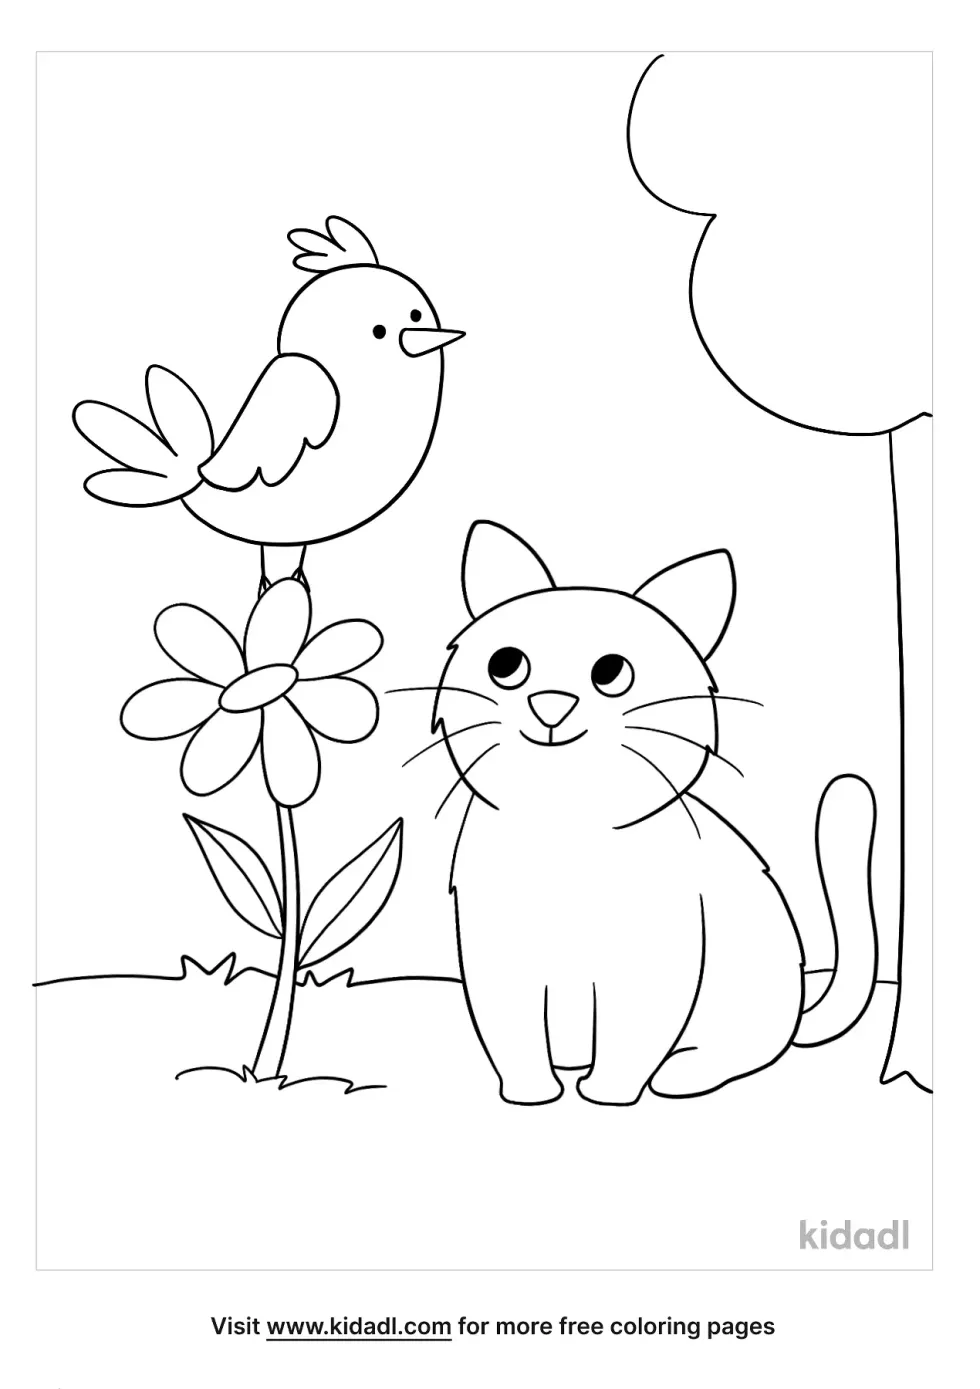 Cat And Bird Coloring Page